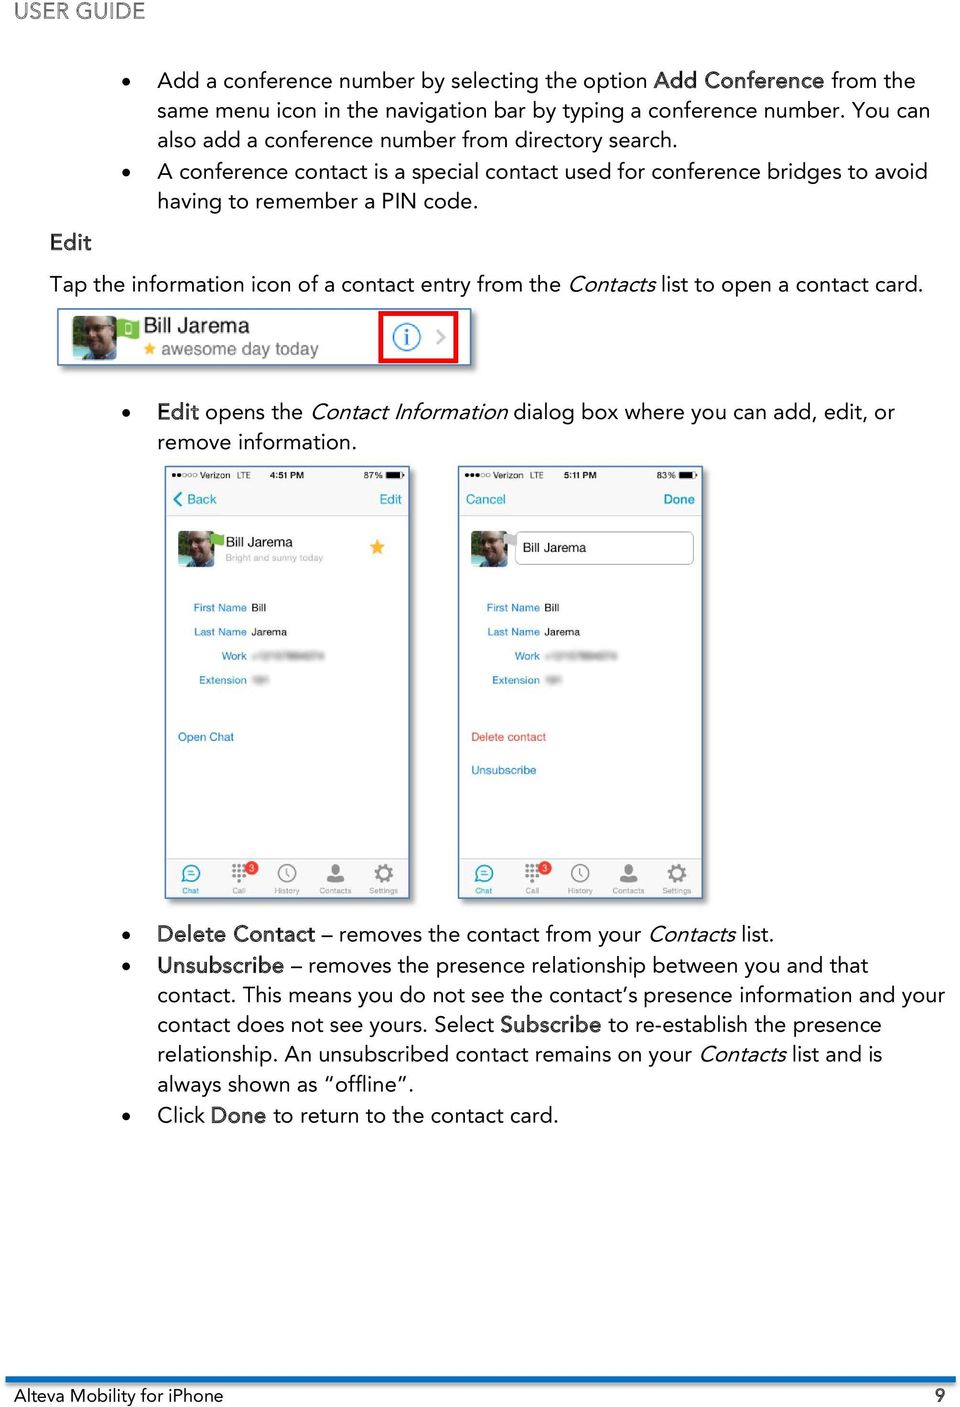 Tap the information icon of a contact entry from the Contacts list to open a contact card. Edit opens the Contact Information dialog box where you can add, edit, or remove information.